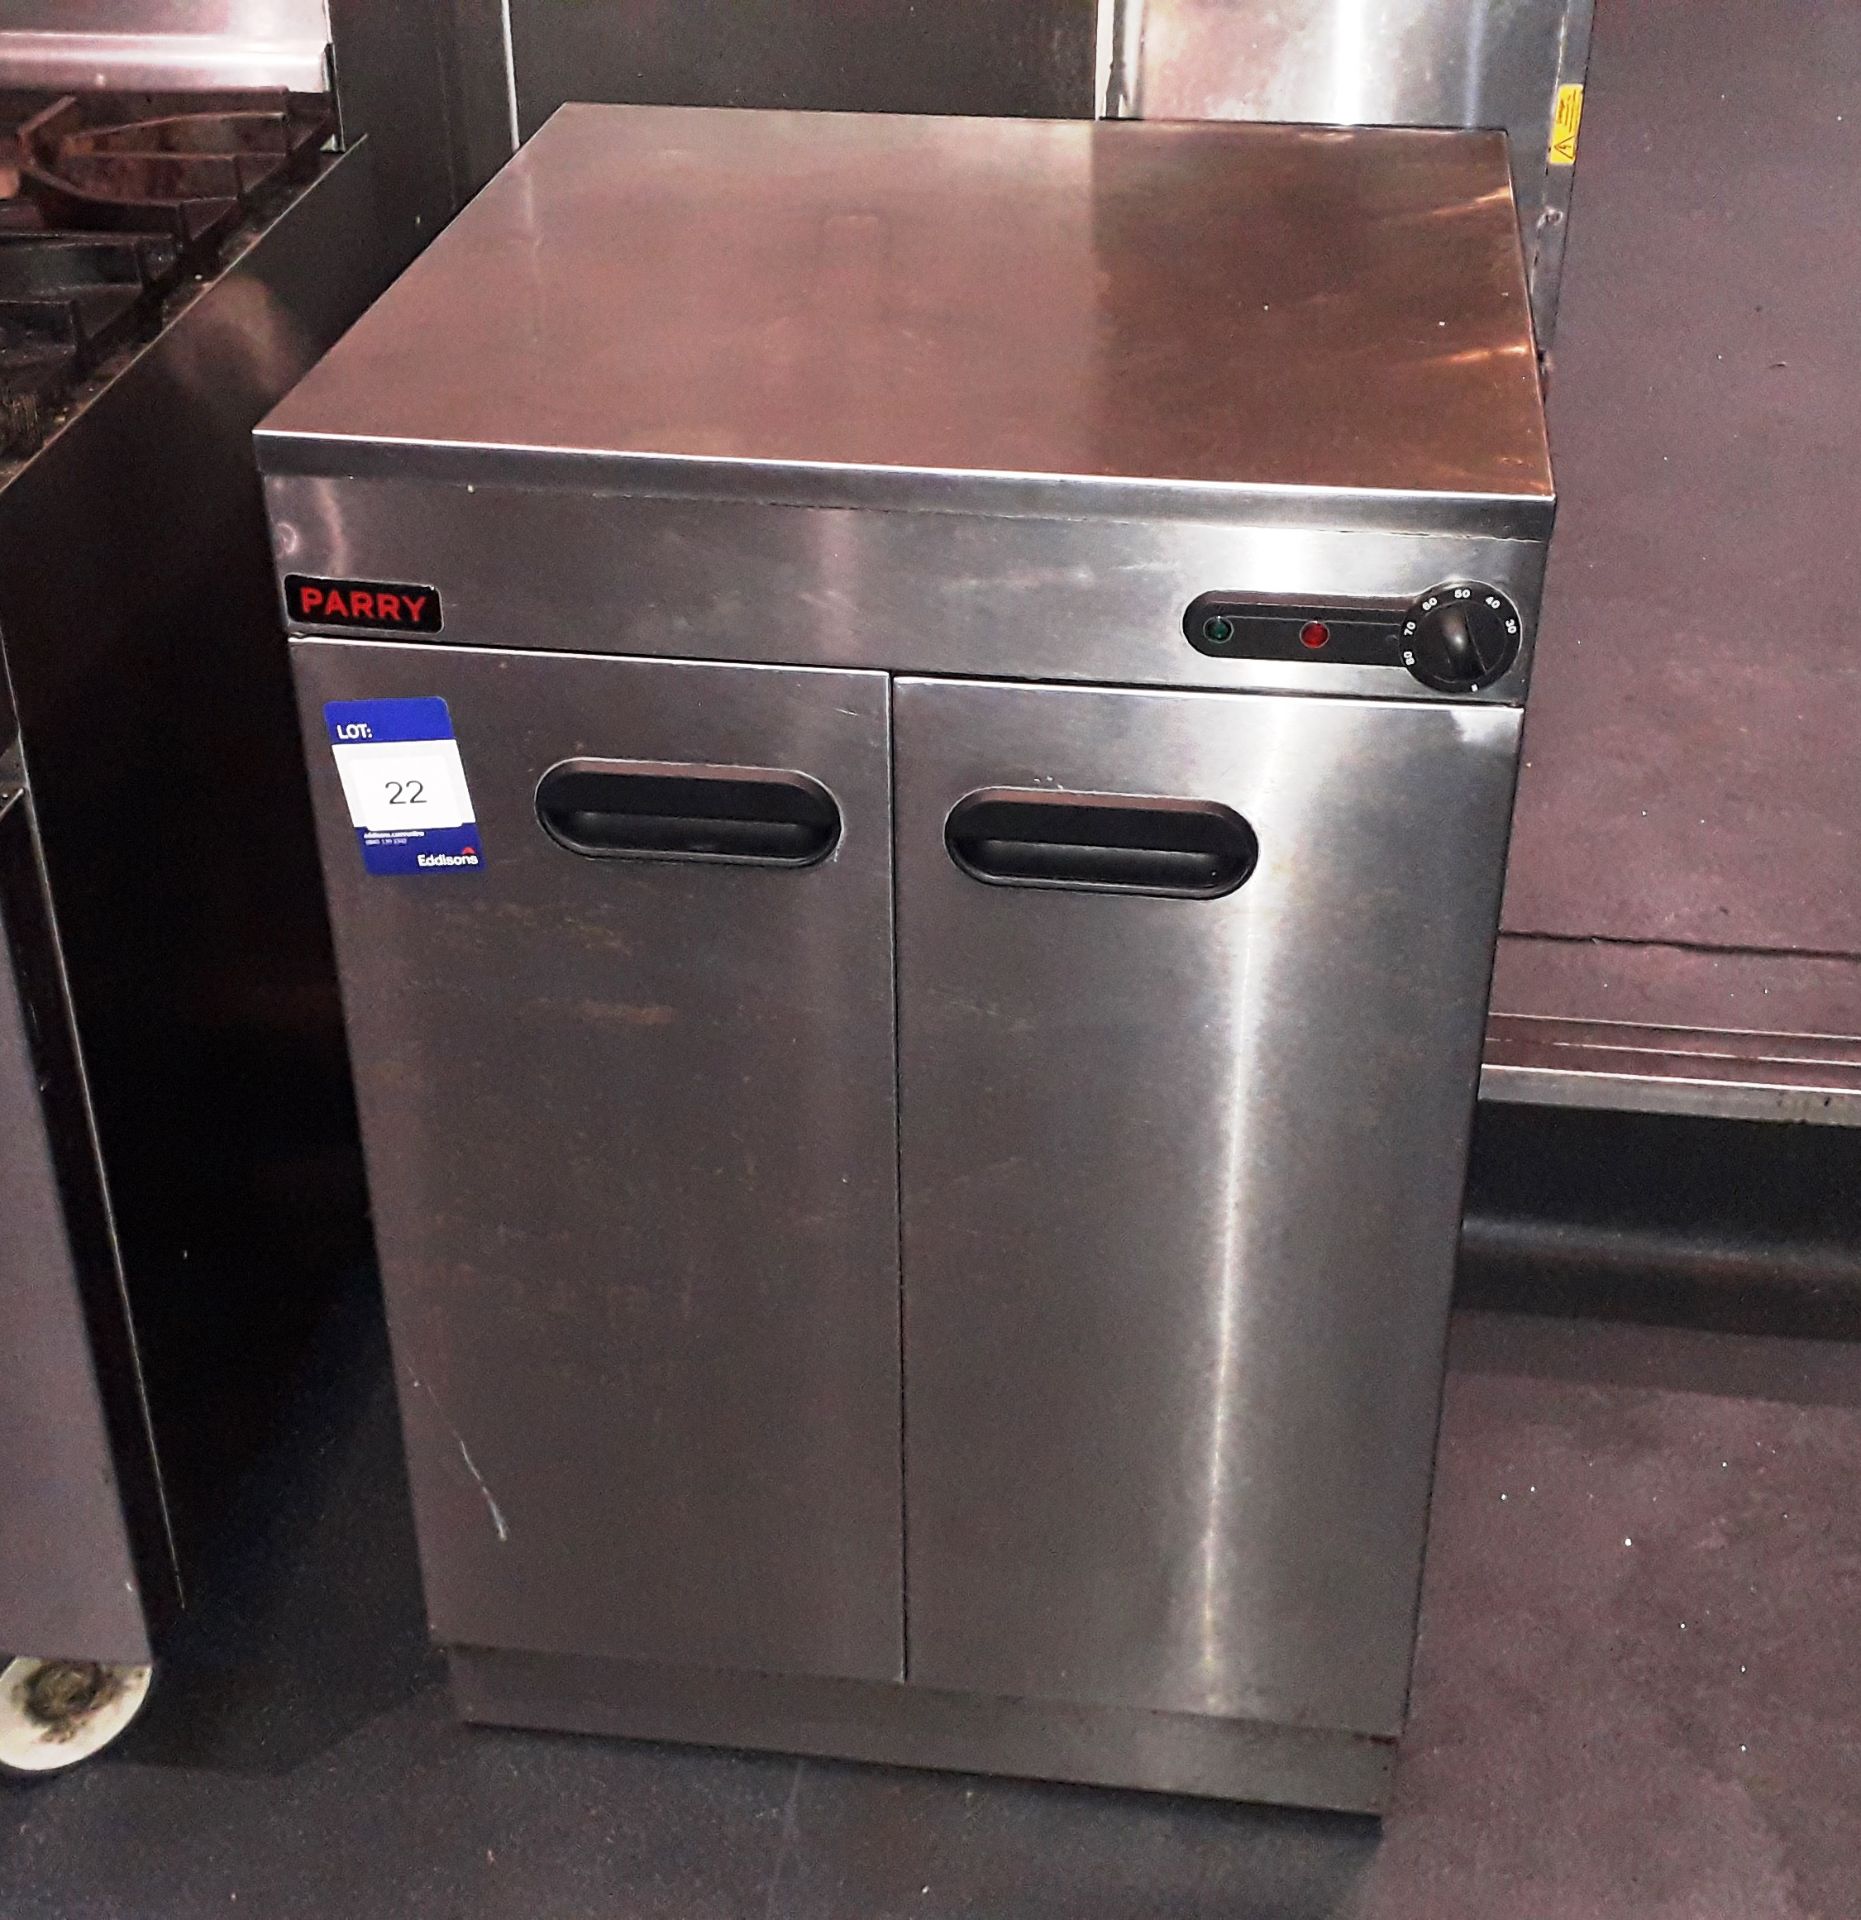 Parry Stainless Steel Counter Hot Cupboard (Requires Repair)